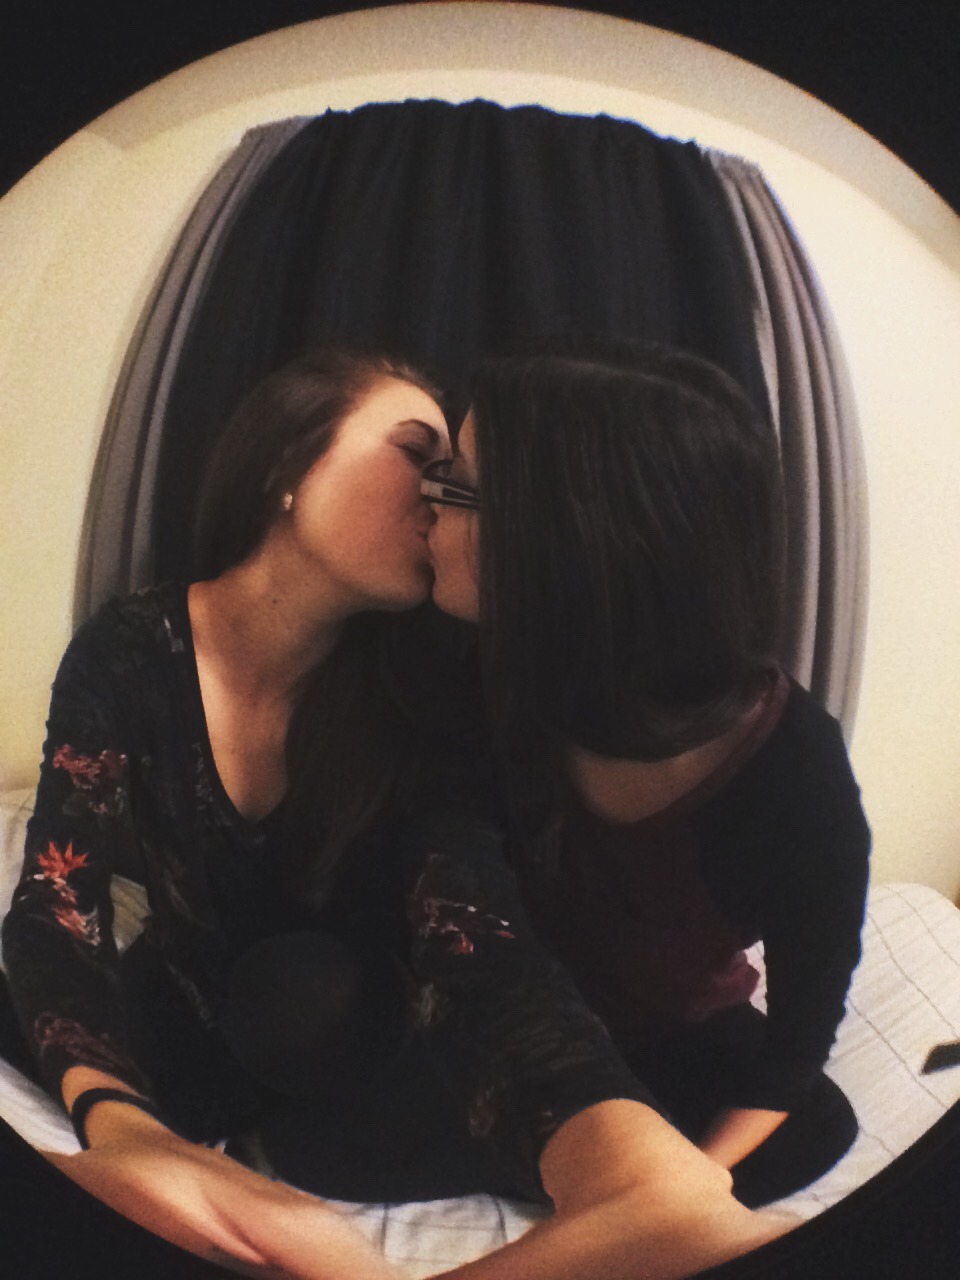 lliduac:  thesongbirds:  I couldn’t have asked for a better New Years kiss this